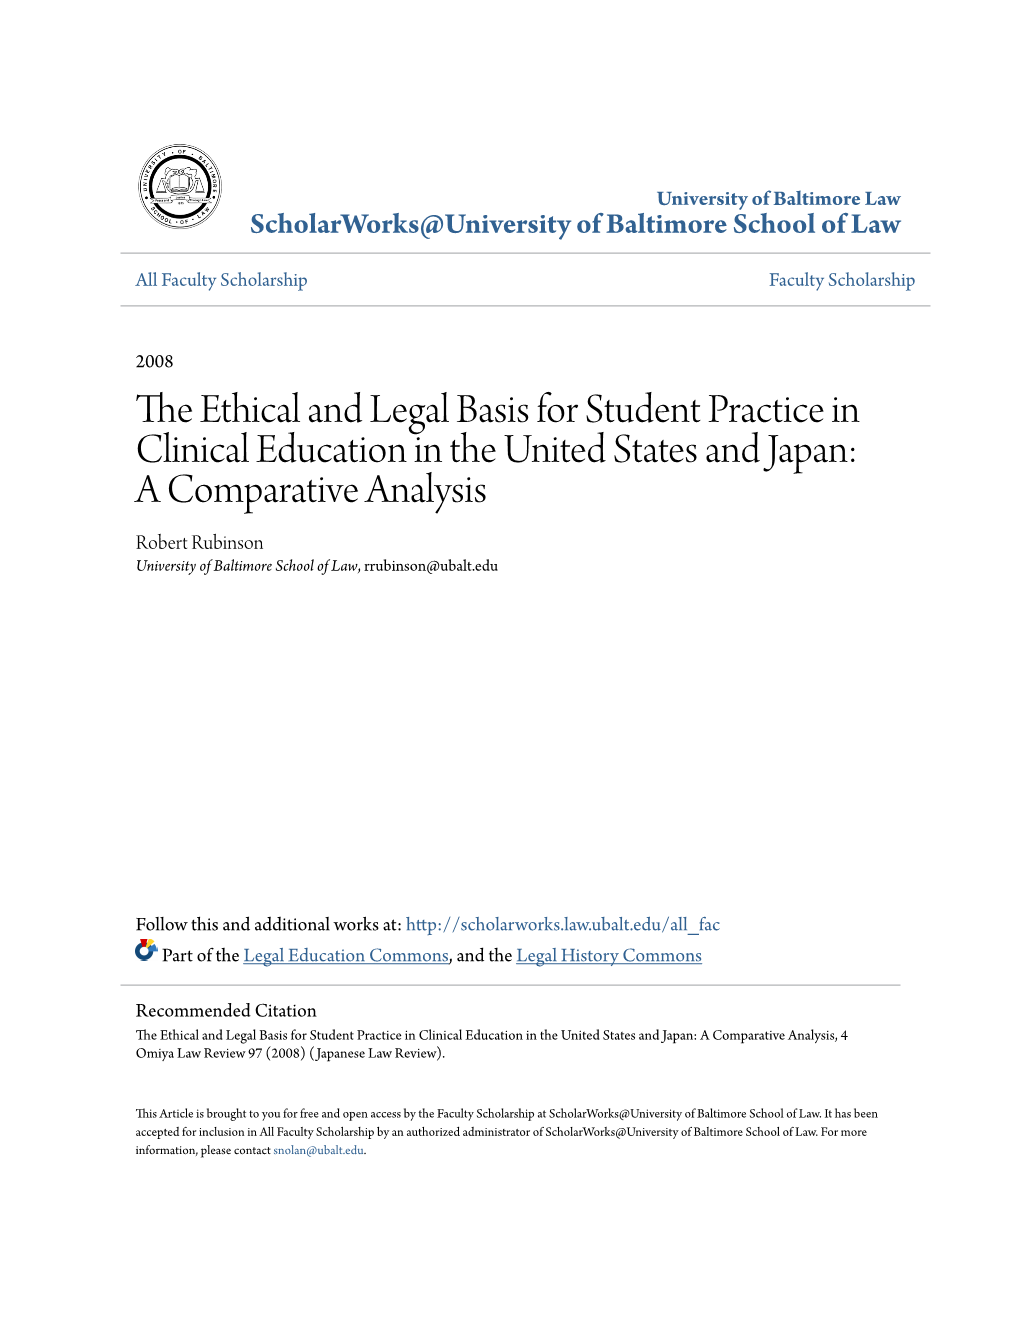 The Ethical and Legal Basis for Student Practice in Clinical Education in the United States and Japan: a Comparative Analysis